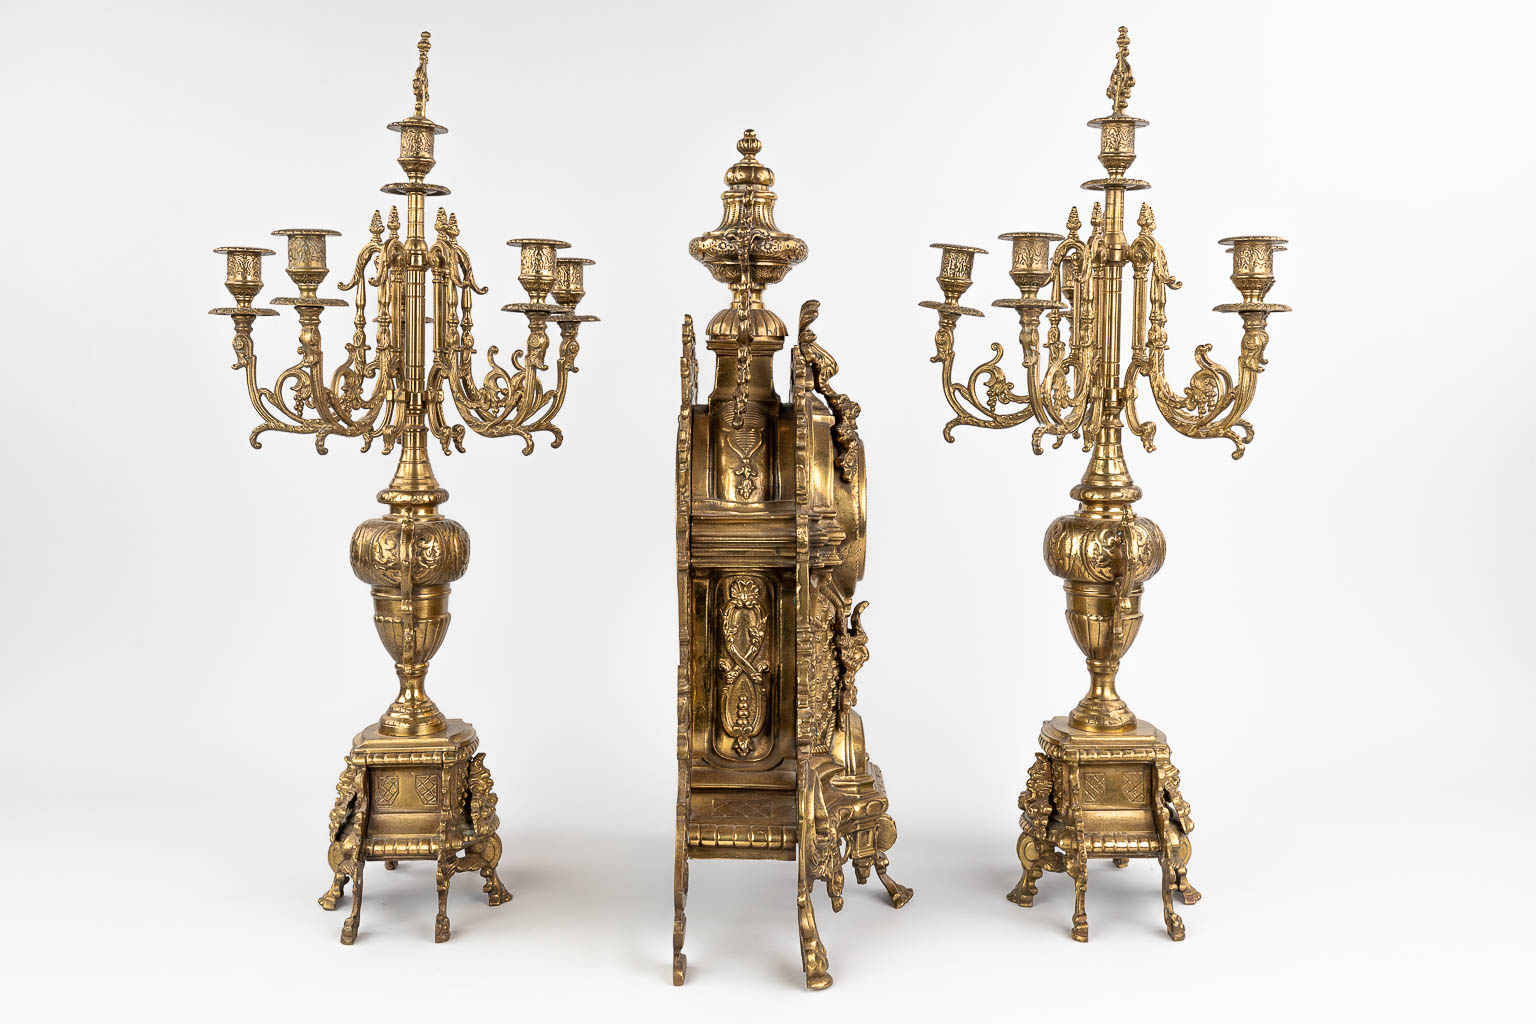 A three-piece mantle garniture consisting of a clock with candelabra, made of bronze. circa 1970. (W: 36 x H: 60 cm)